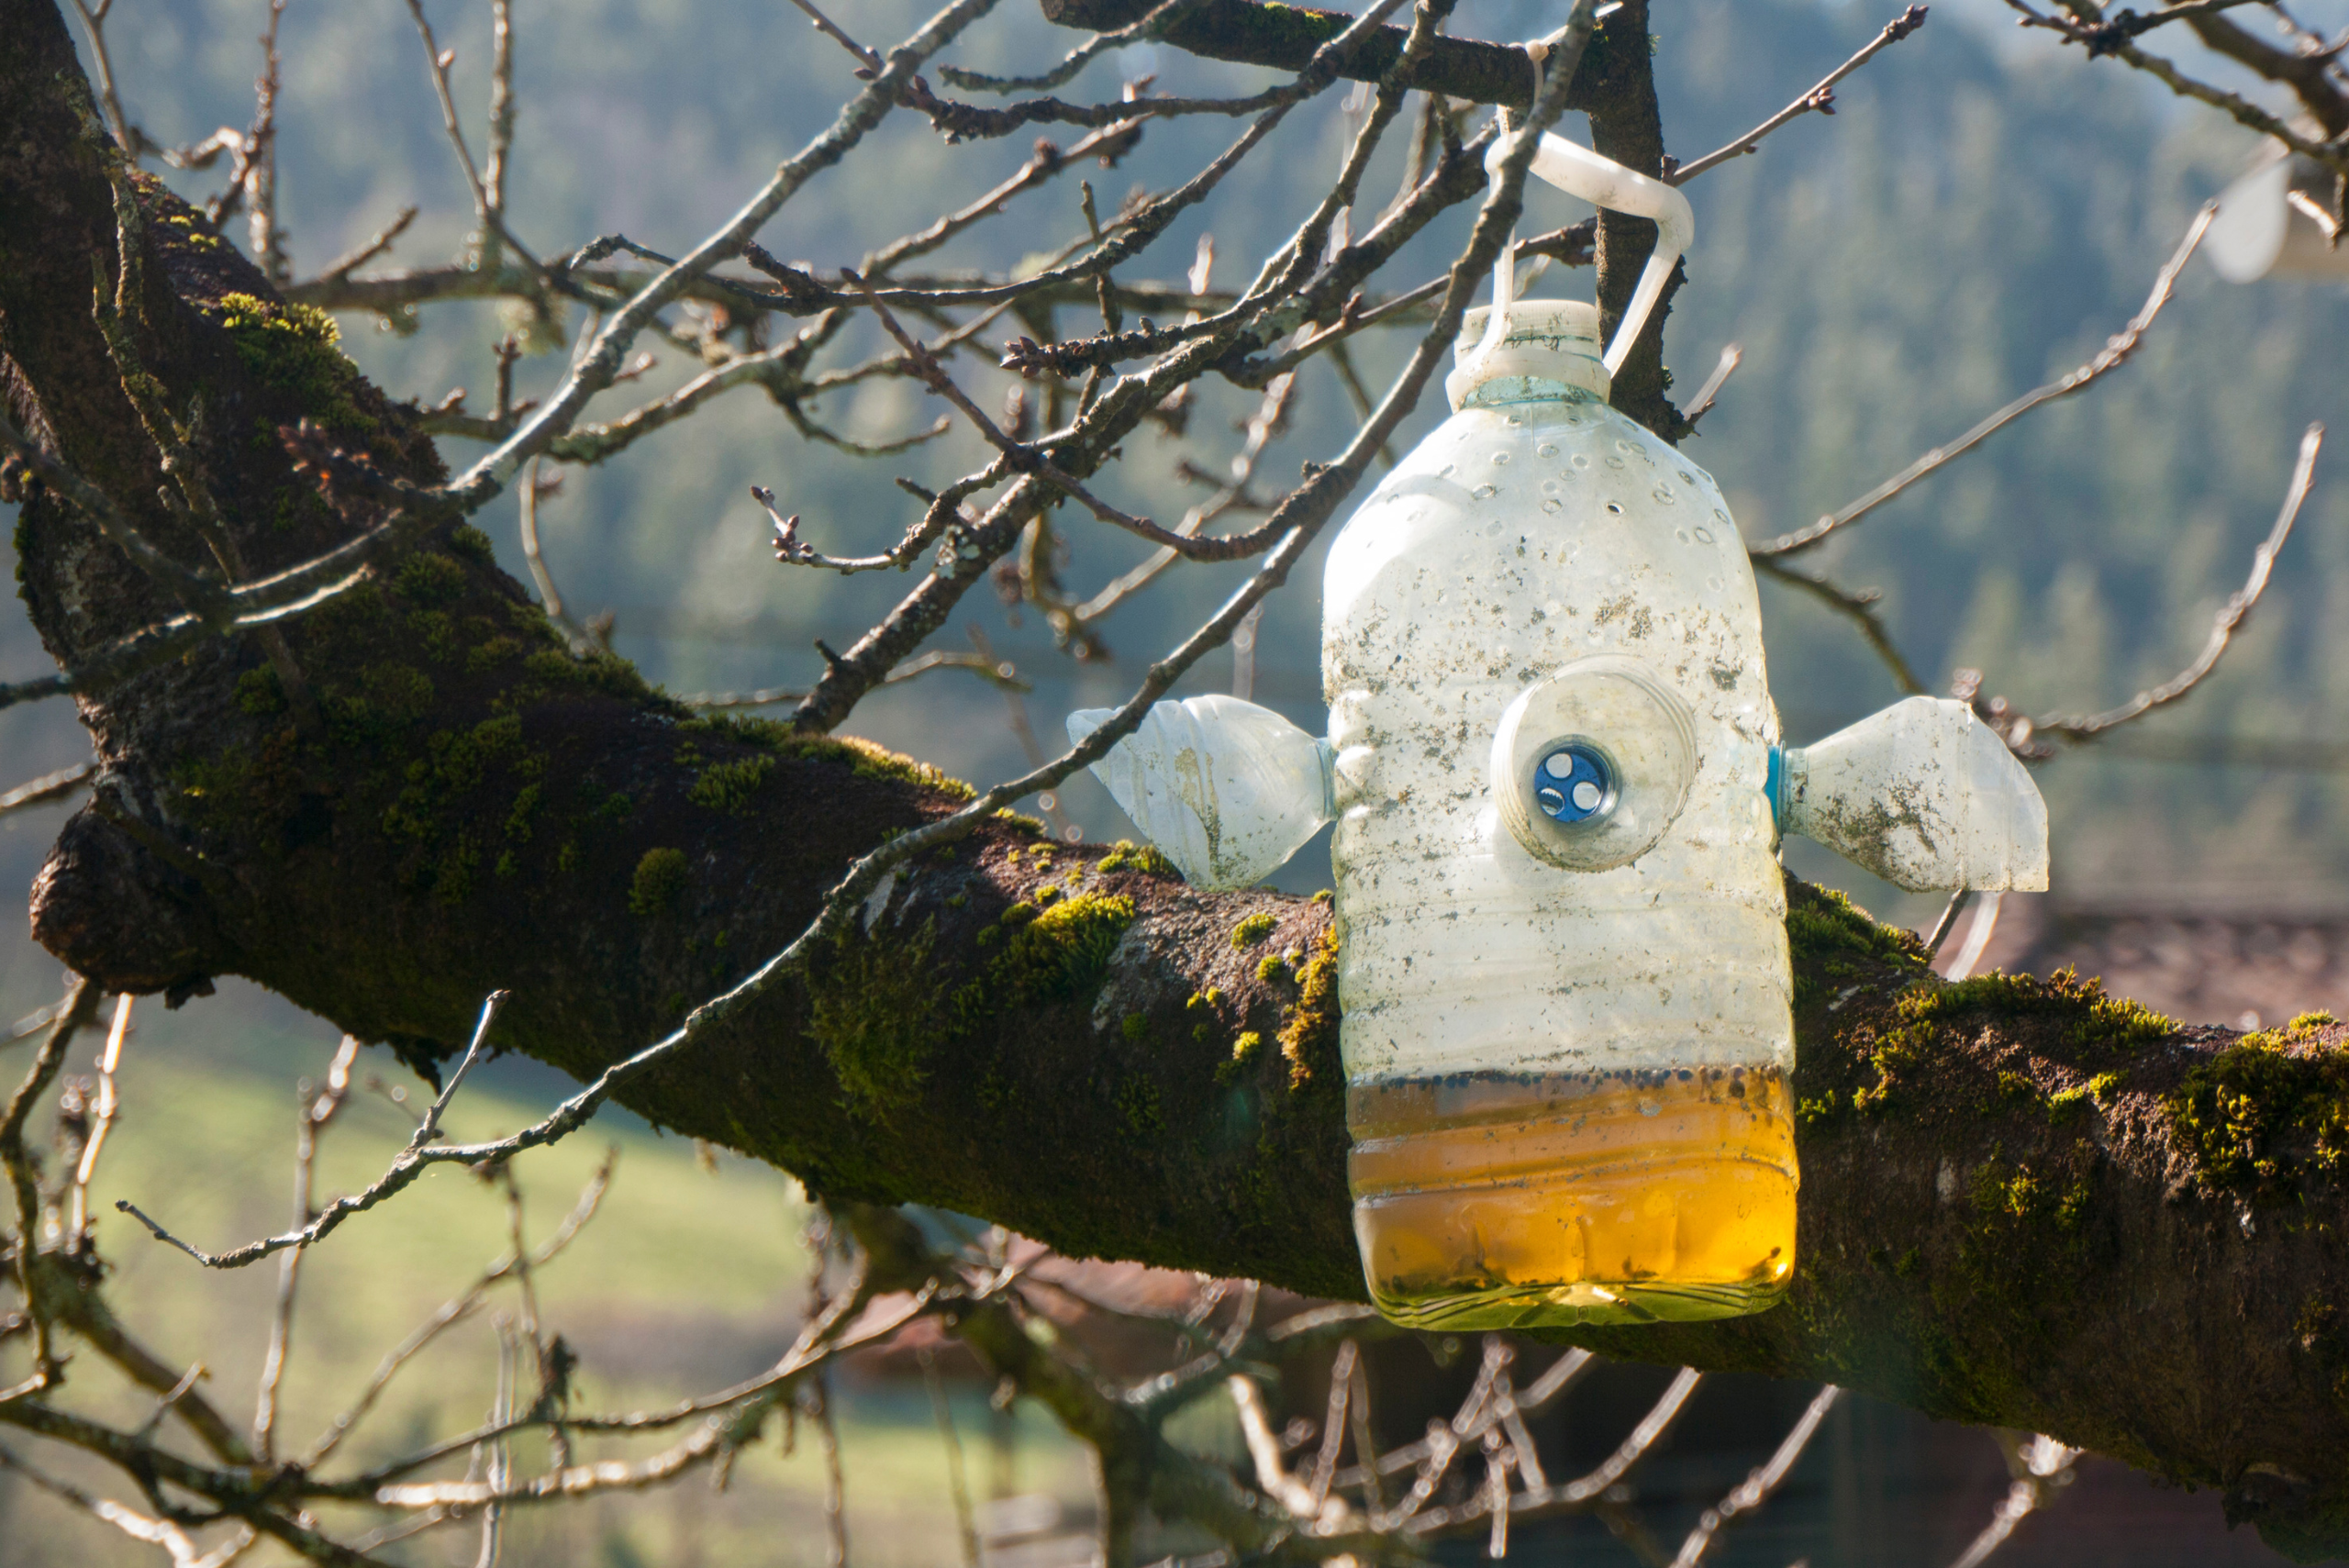 Bottle with sugary liquid hung in tree as DIY mosquito trap.